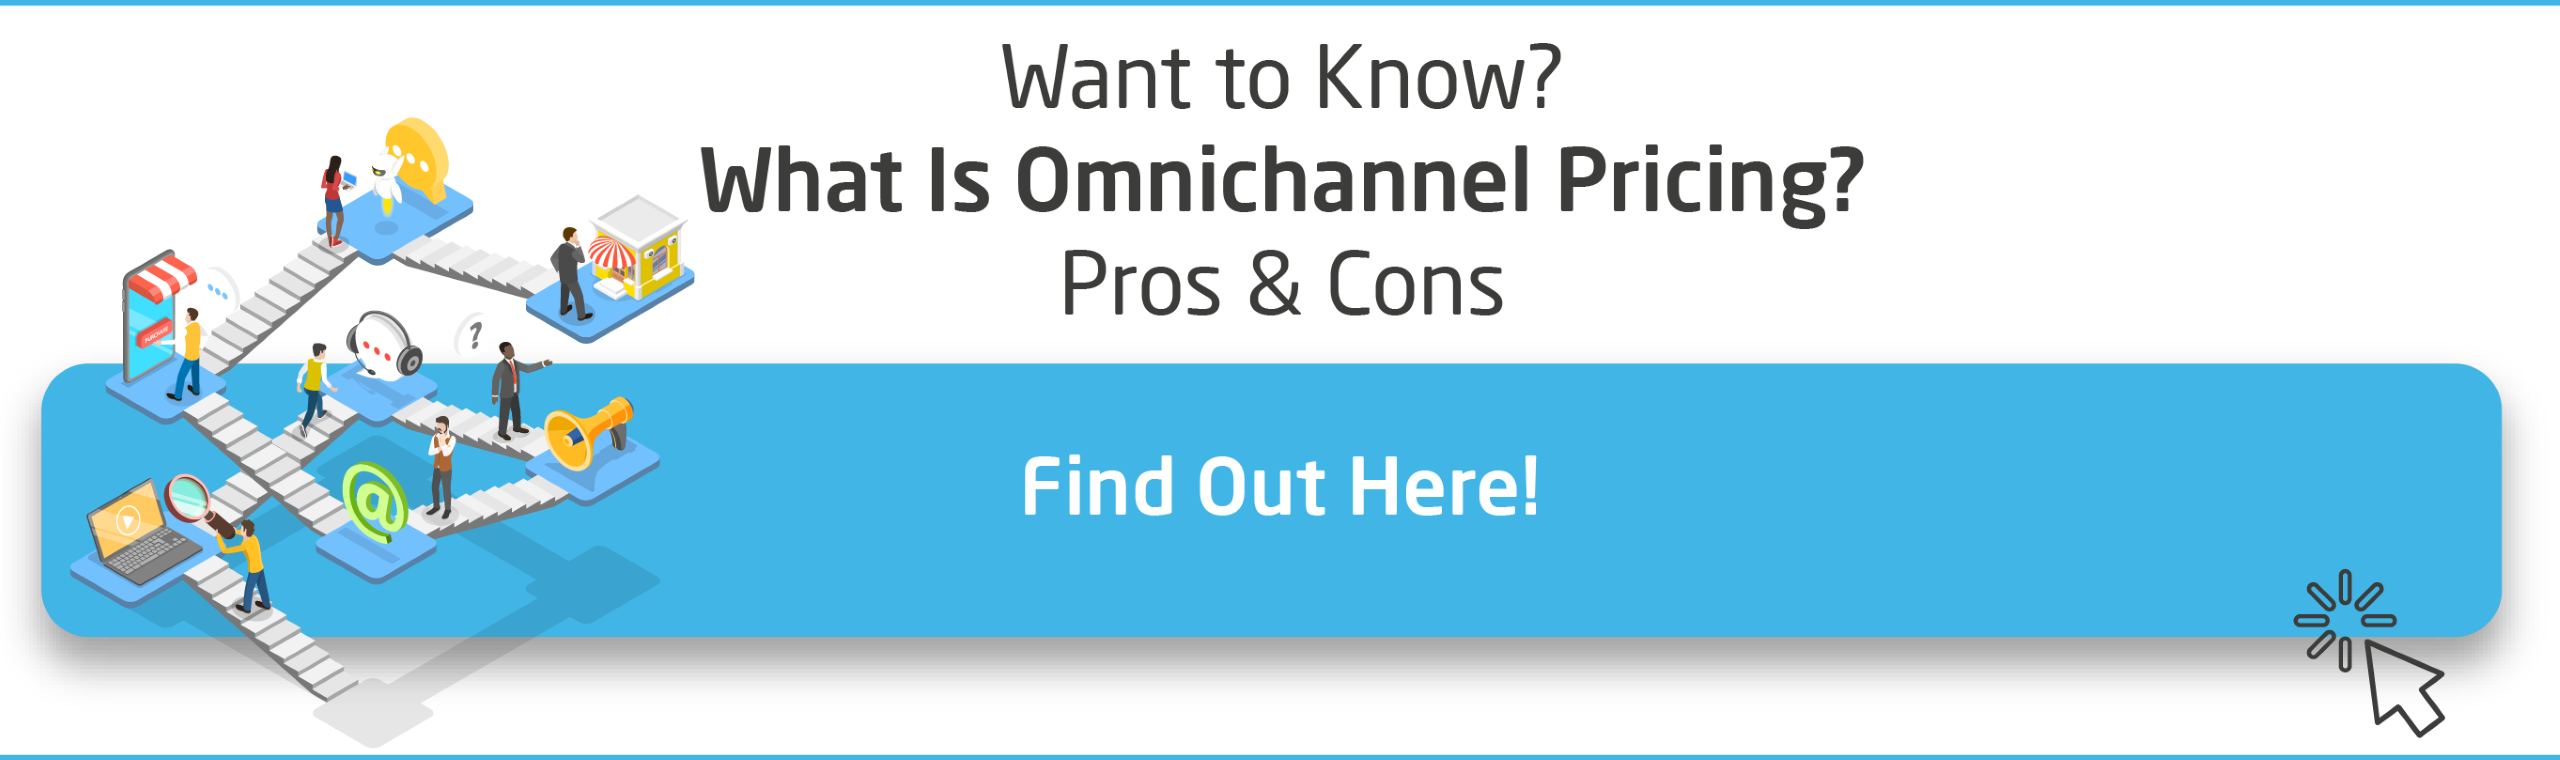 CTA-What-Is-Omnichannel-Pricing-and-its-Pros-and-Cons